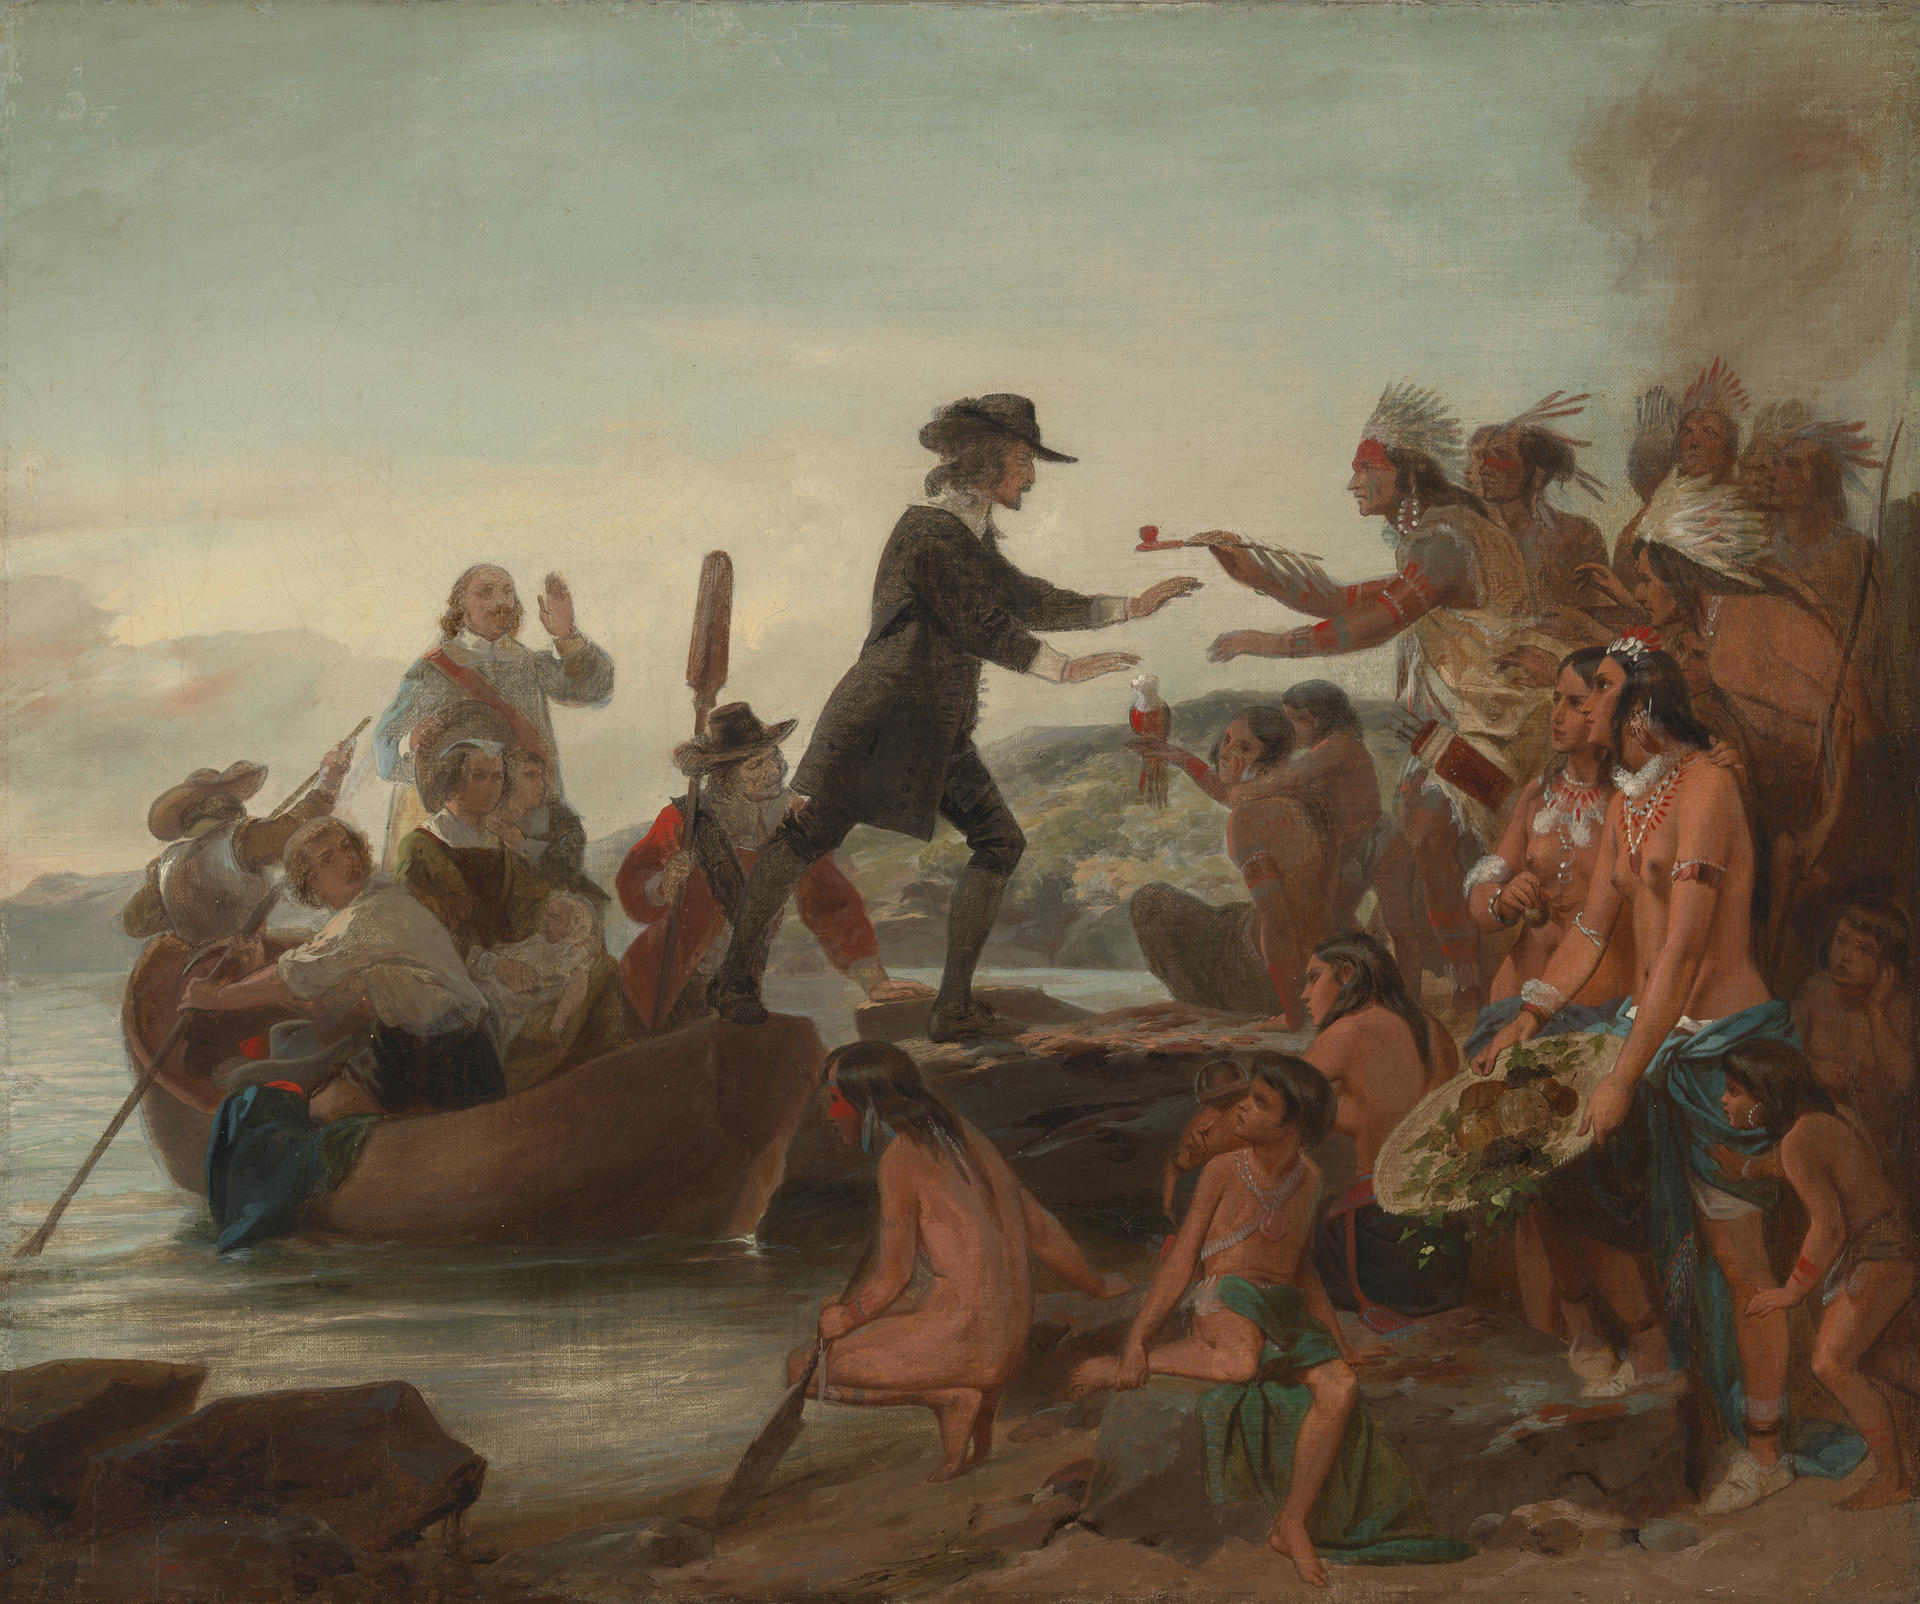 Detail of Alonzo Chappel's "The Landing of Roger Williams in 1636", 1857